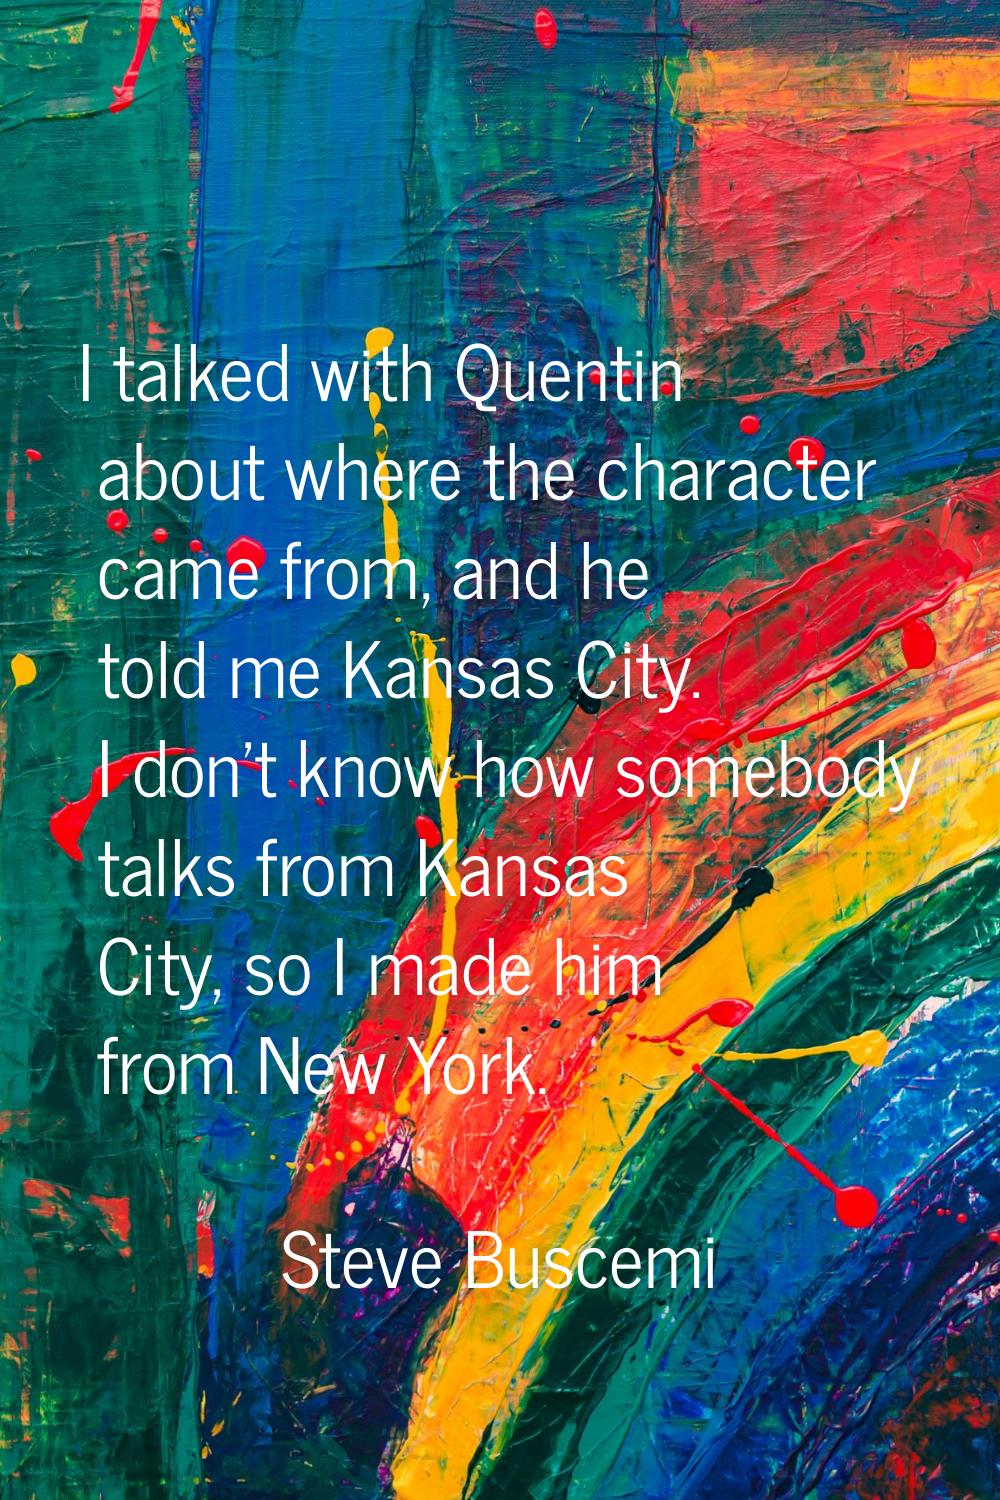 I talked with Quentin about where the character came from, and he told me Kansas City. I don't know